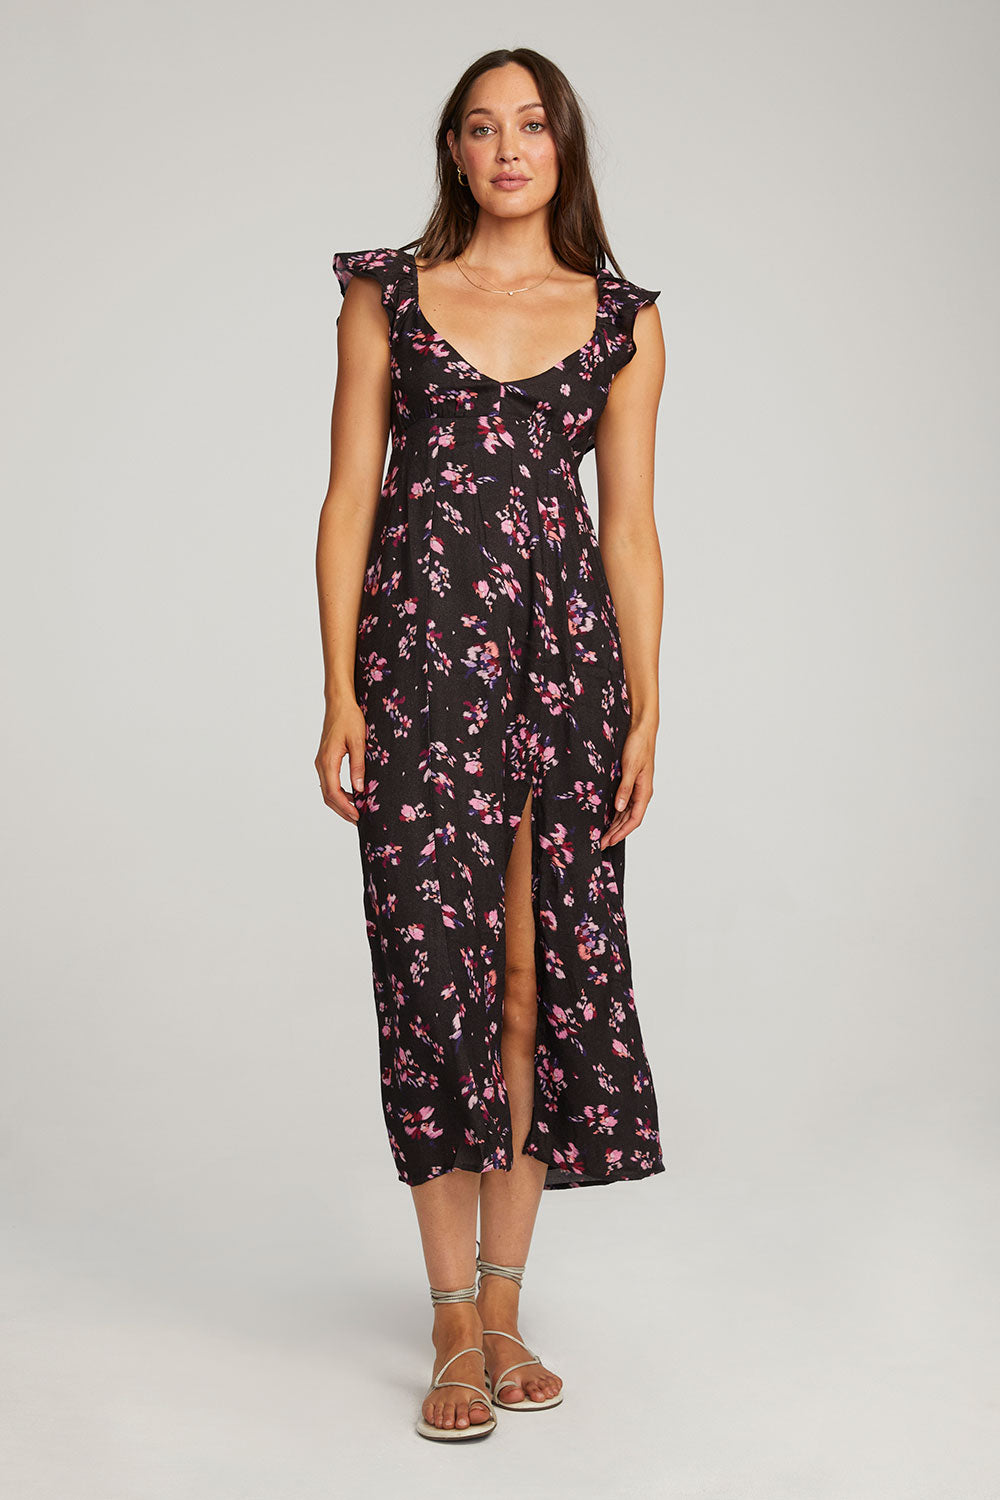 The Libbie Maxi Dress by Saltwater Luxe - Black Floral